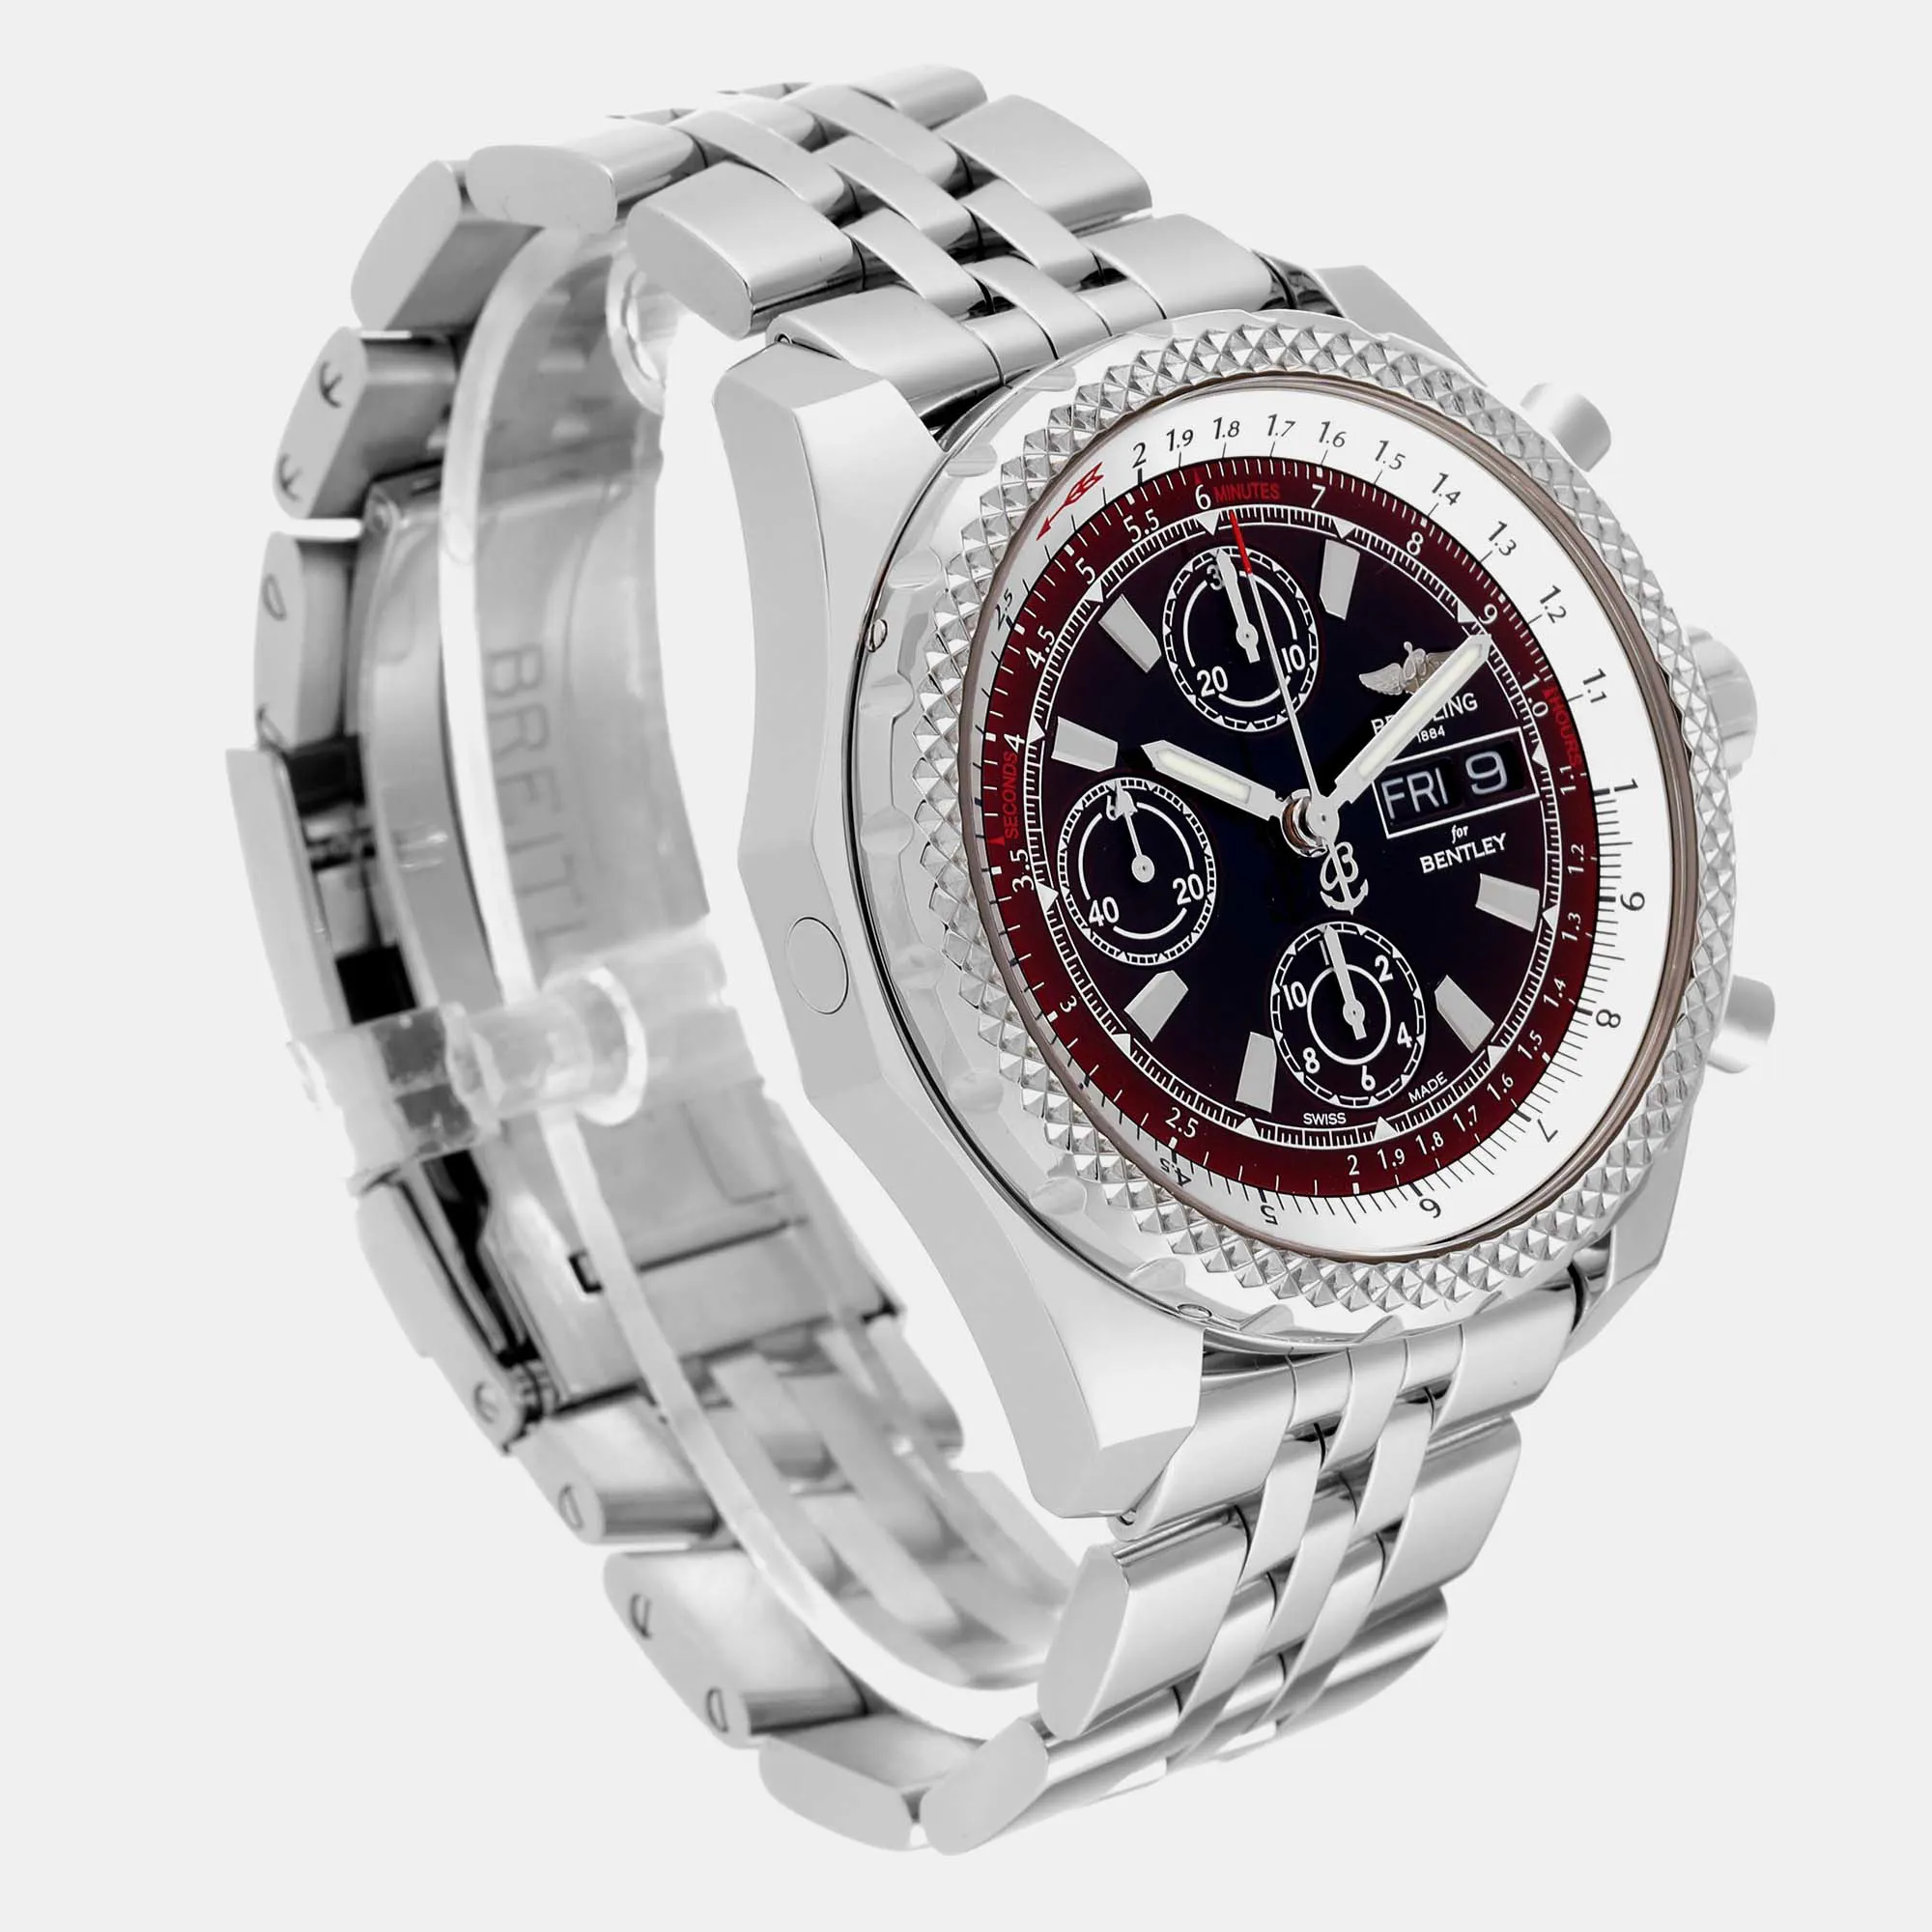 Breitling Bentley A13365 45mm Stainless steel 4